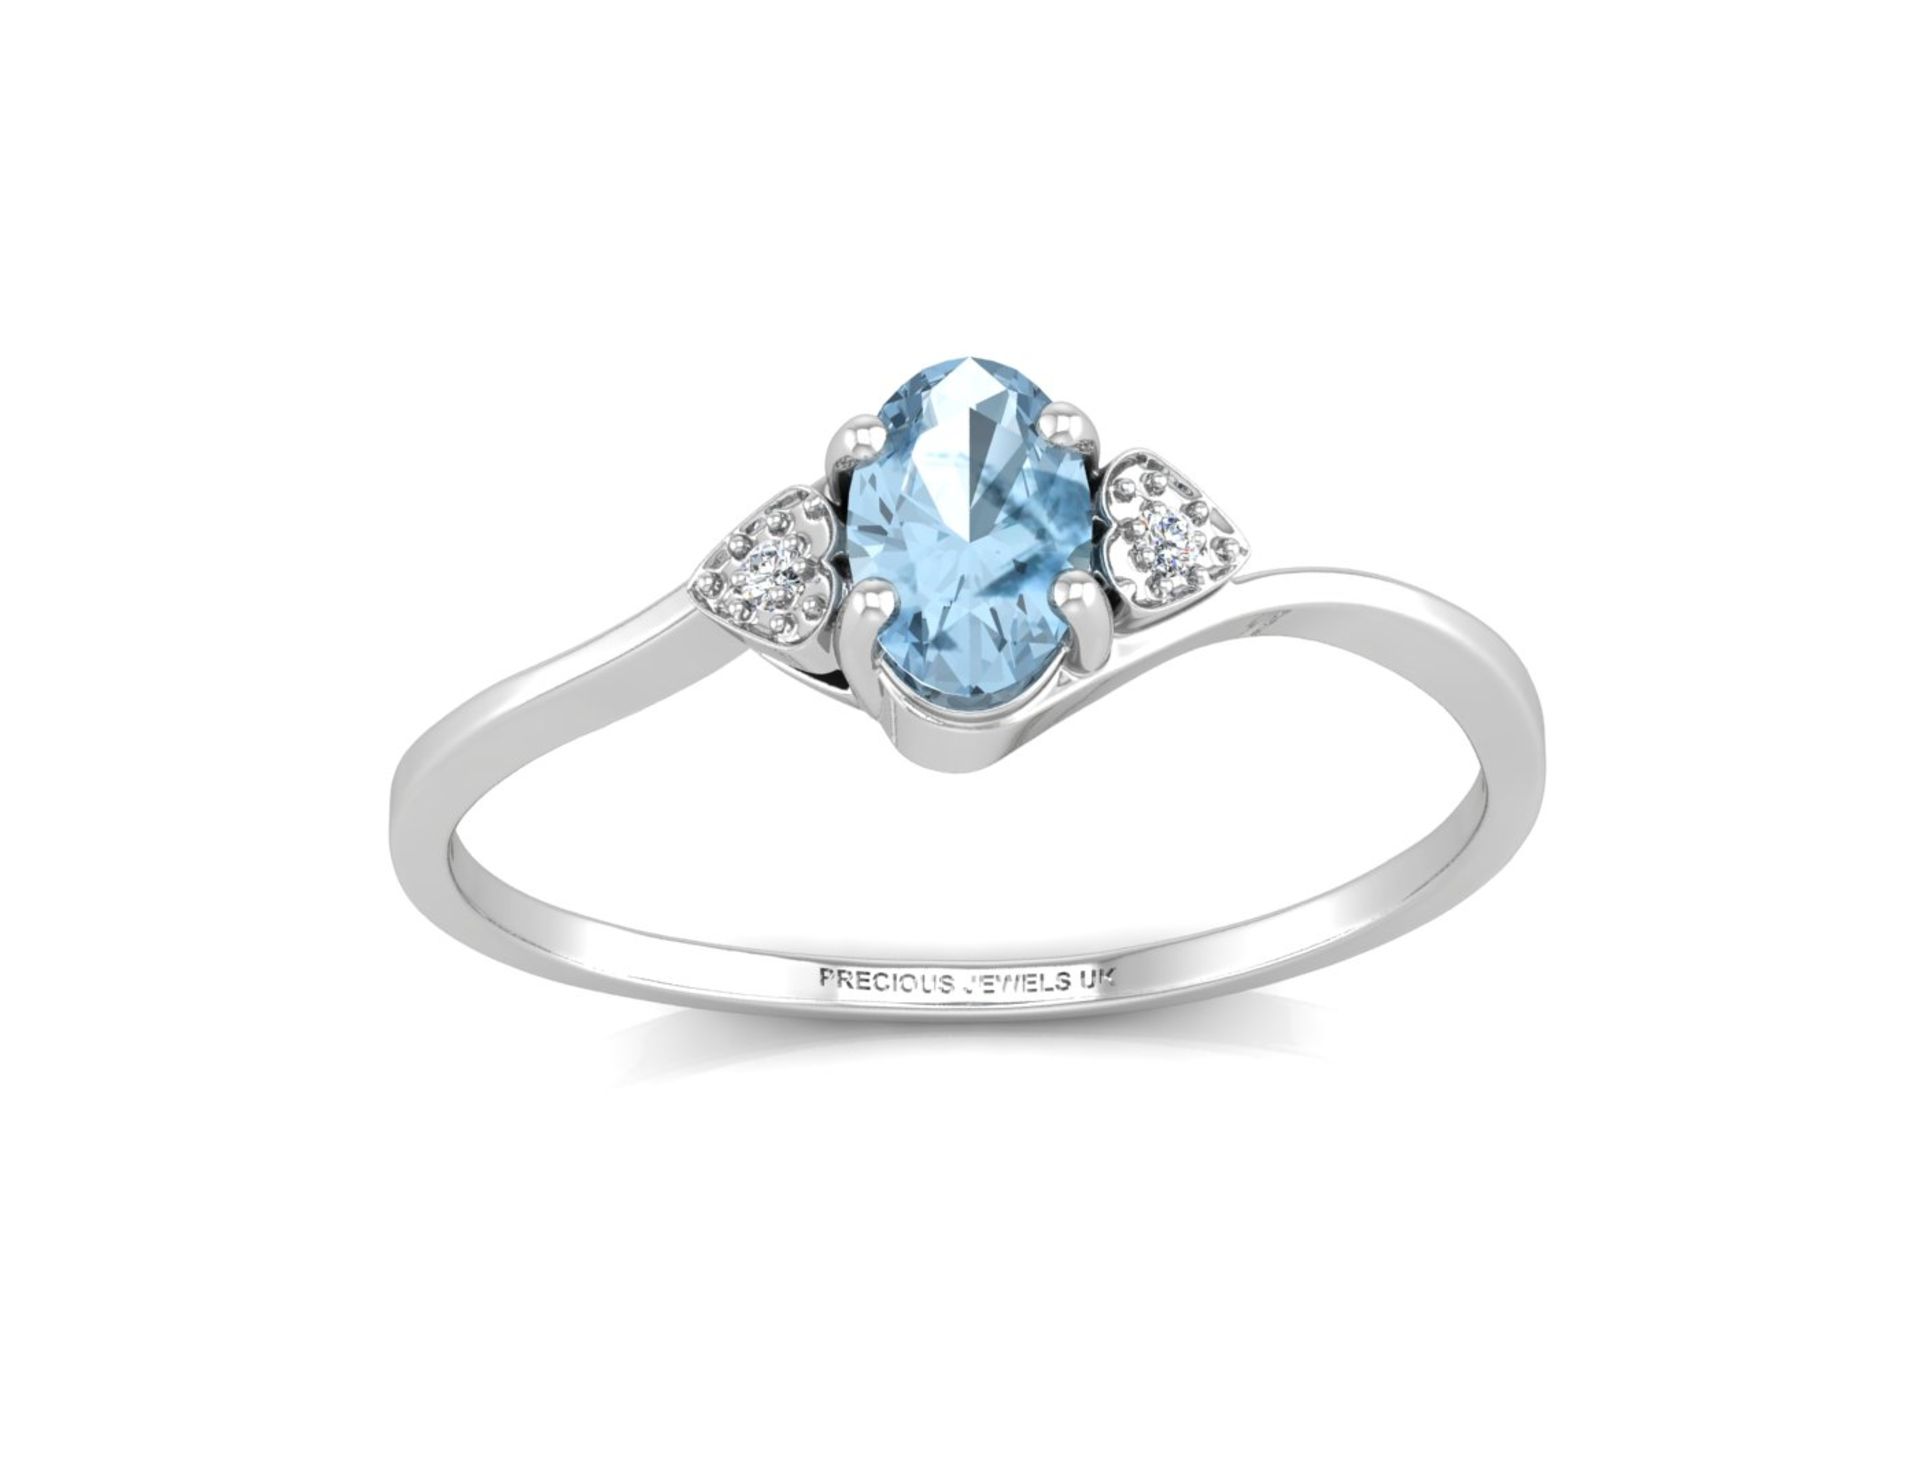 9ct White Gold Fancy Cluster Diamond Blue Topaz Ring 0.01 Carats - Valued by AGI £275.00 - 9ct White - Image 3 of 5